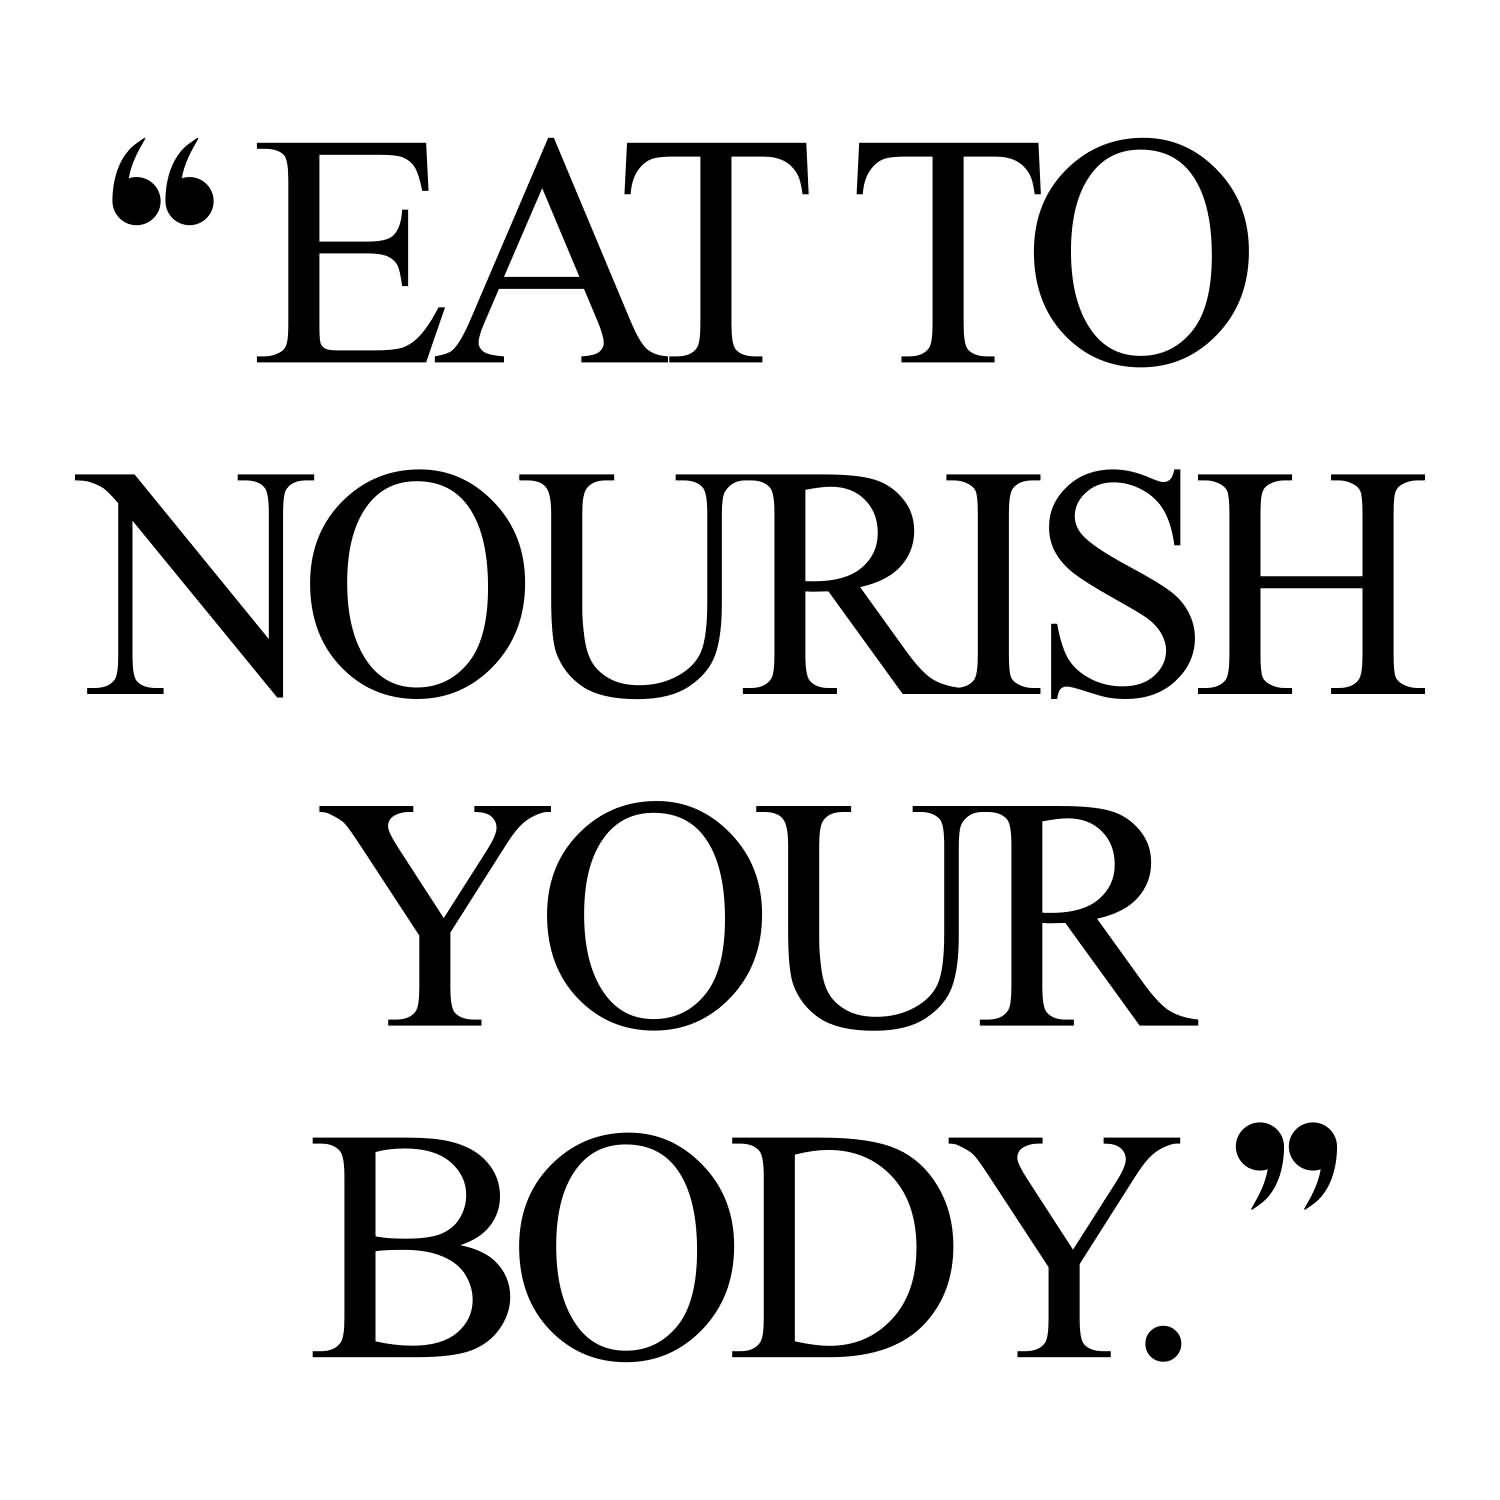 Eat to nourish your body.